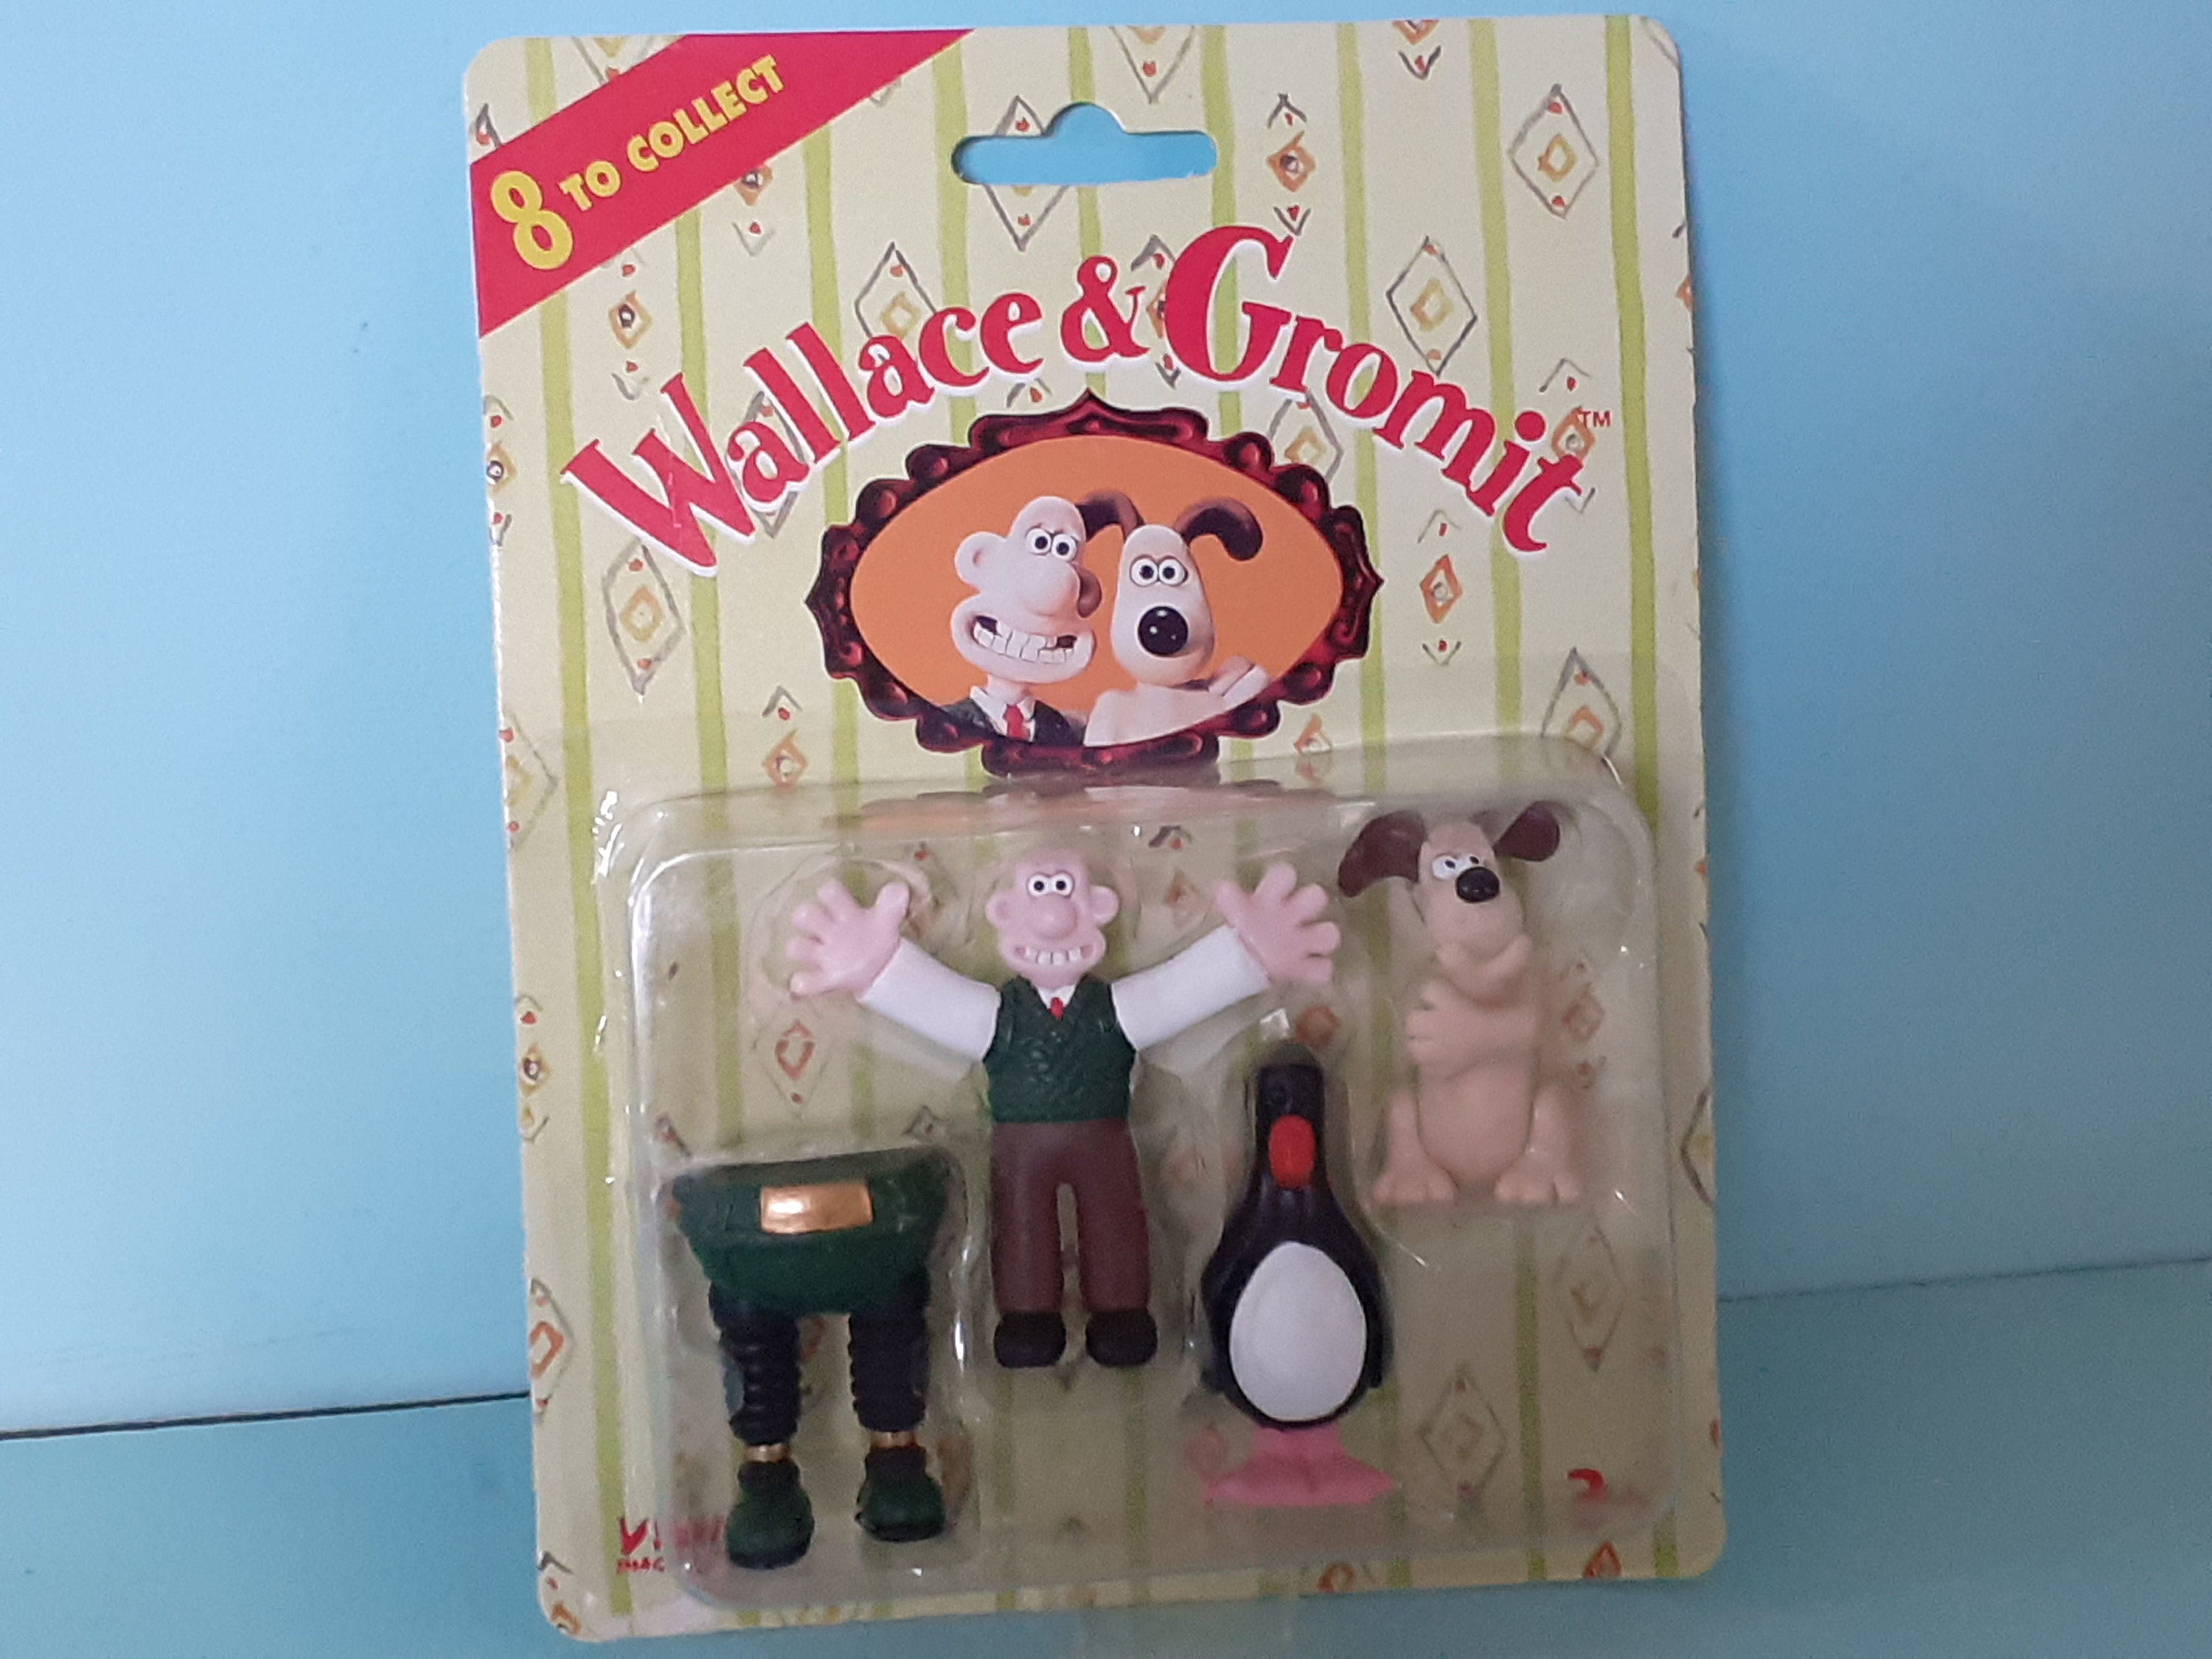 Easter Eggs in Wallace and Gromit: The Wrong Trousers - Apparel of Laughs  Blog